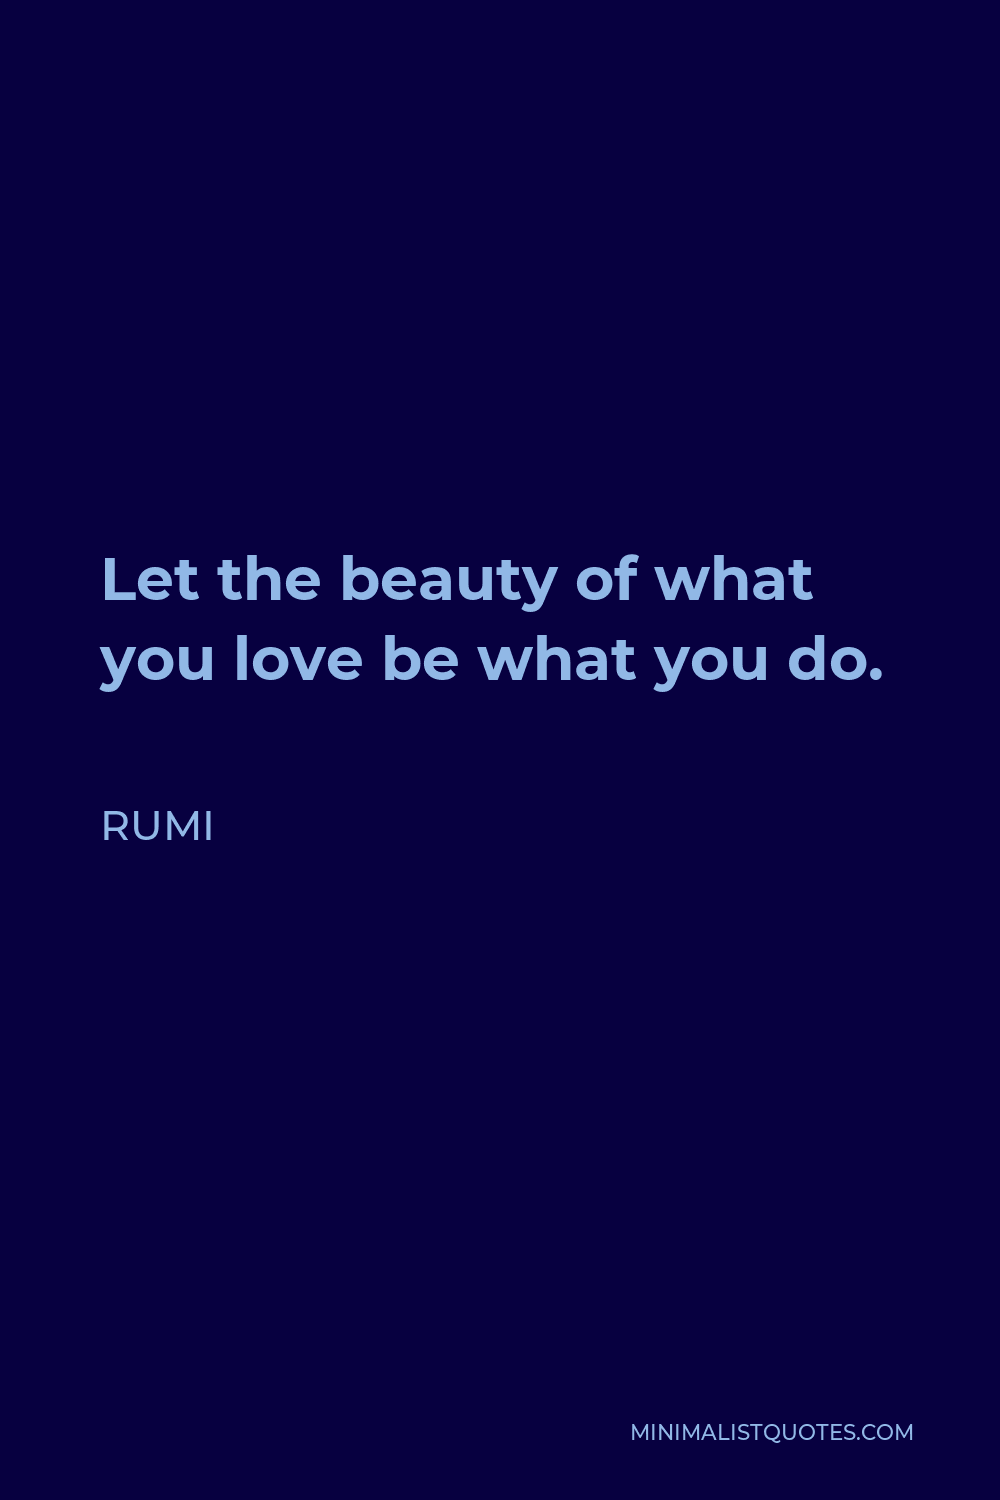 Rumi Quote - Let the beauty of what you love be what you do.